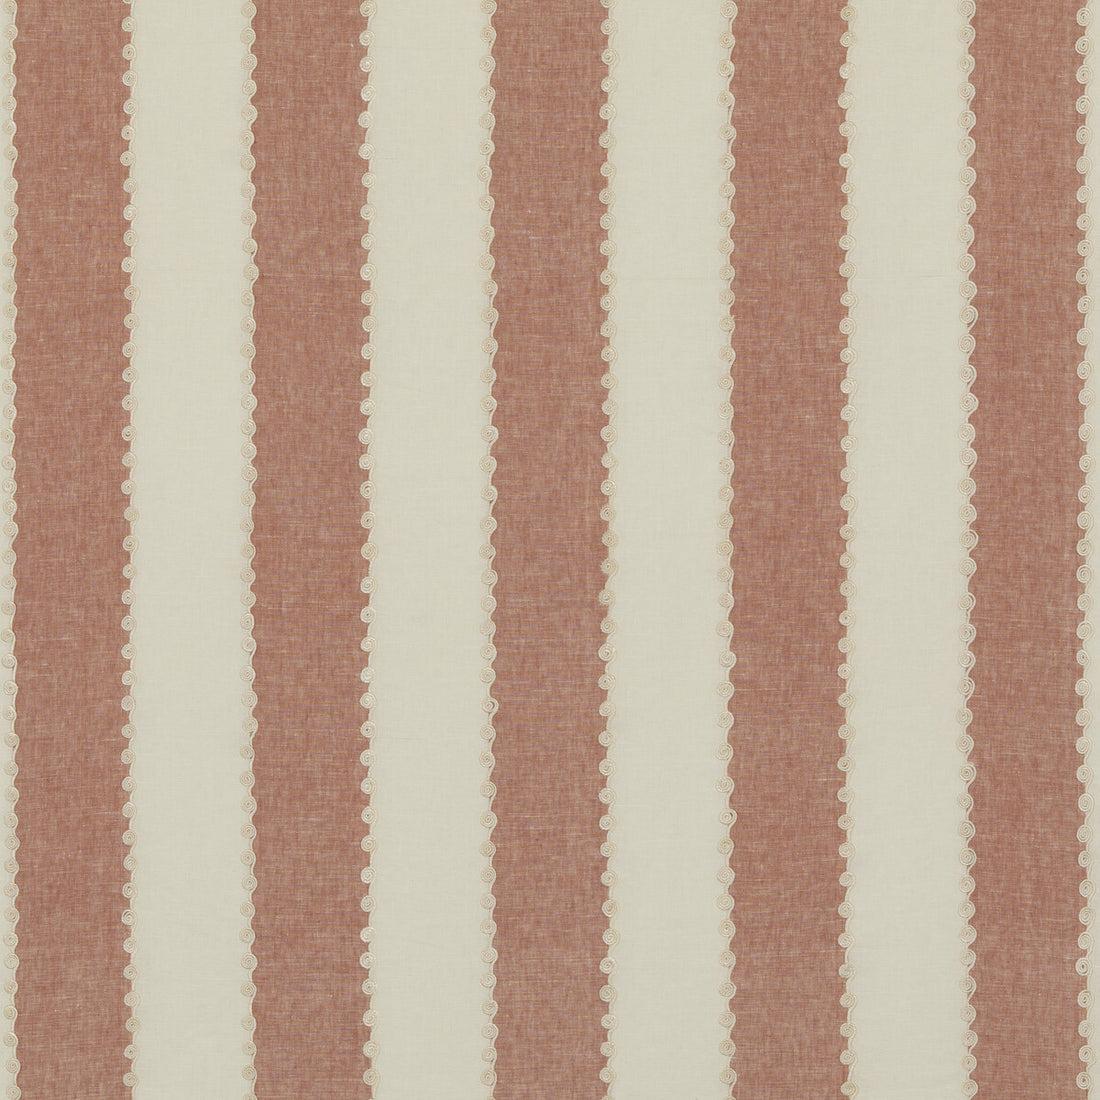 Ashmore Stripe fabric in red color - pattern BF10944.450.0 - by G P &amp; J Baker in the Ashmore collection